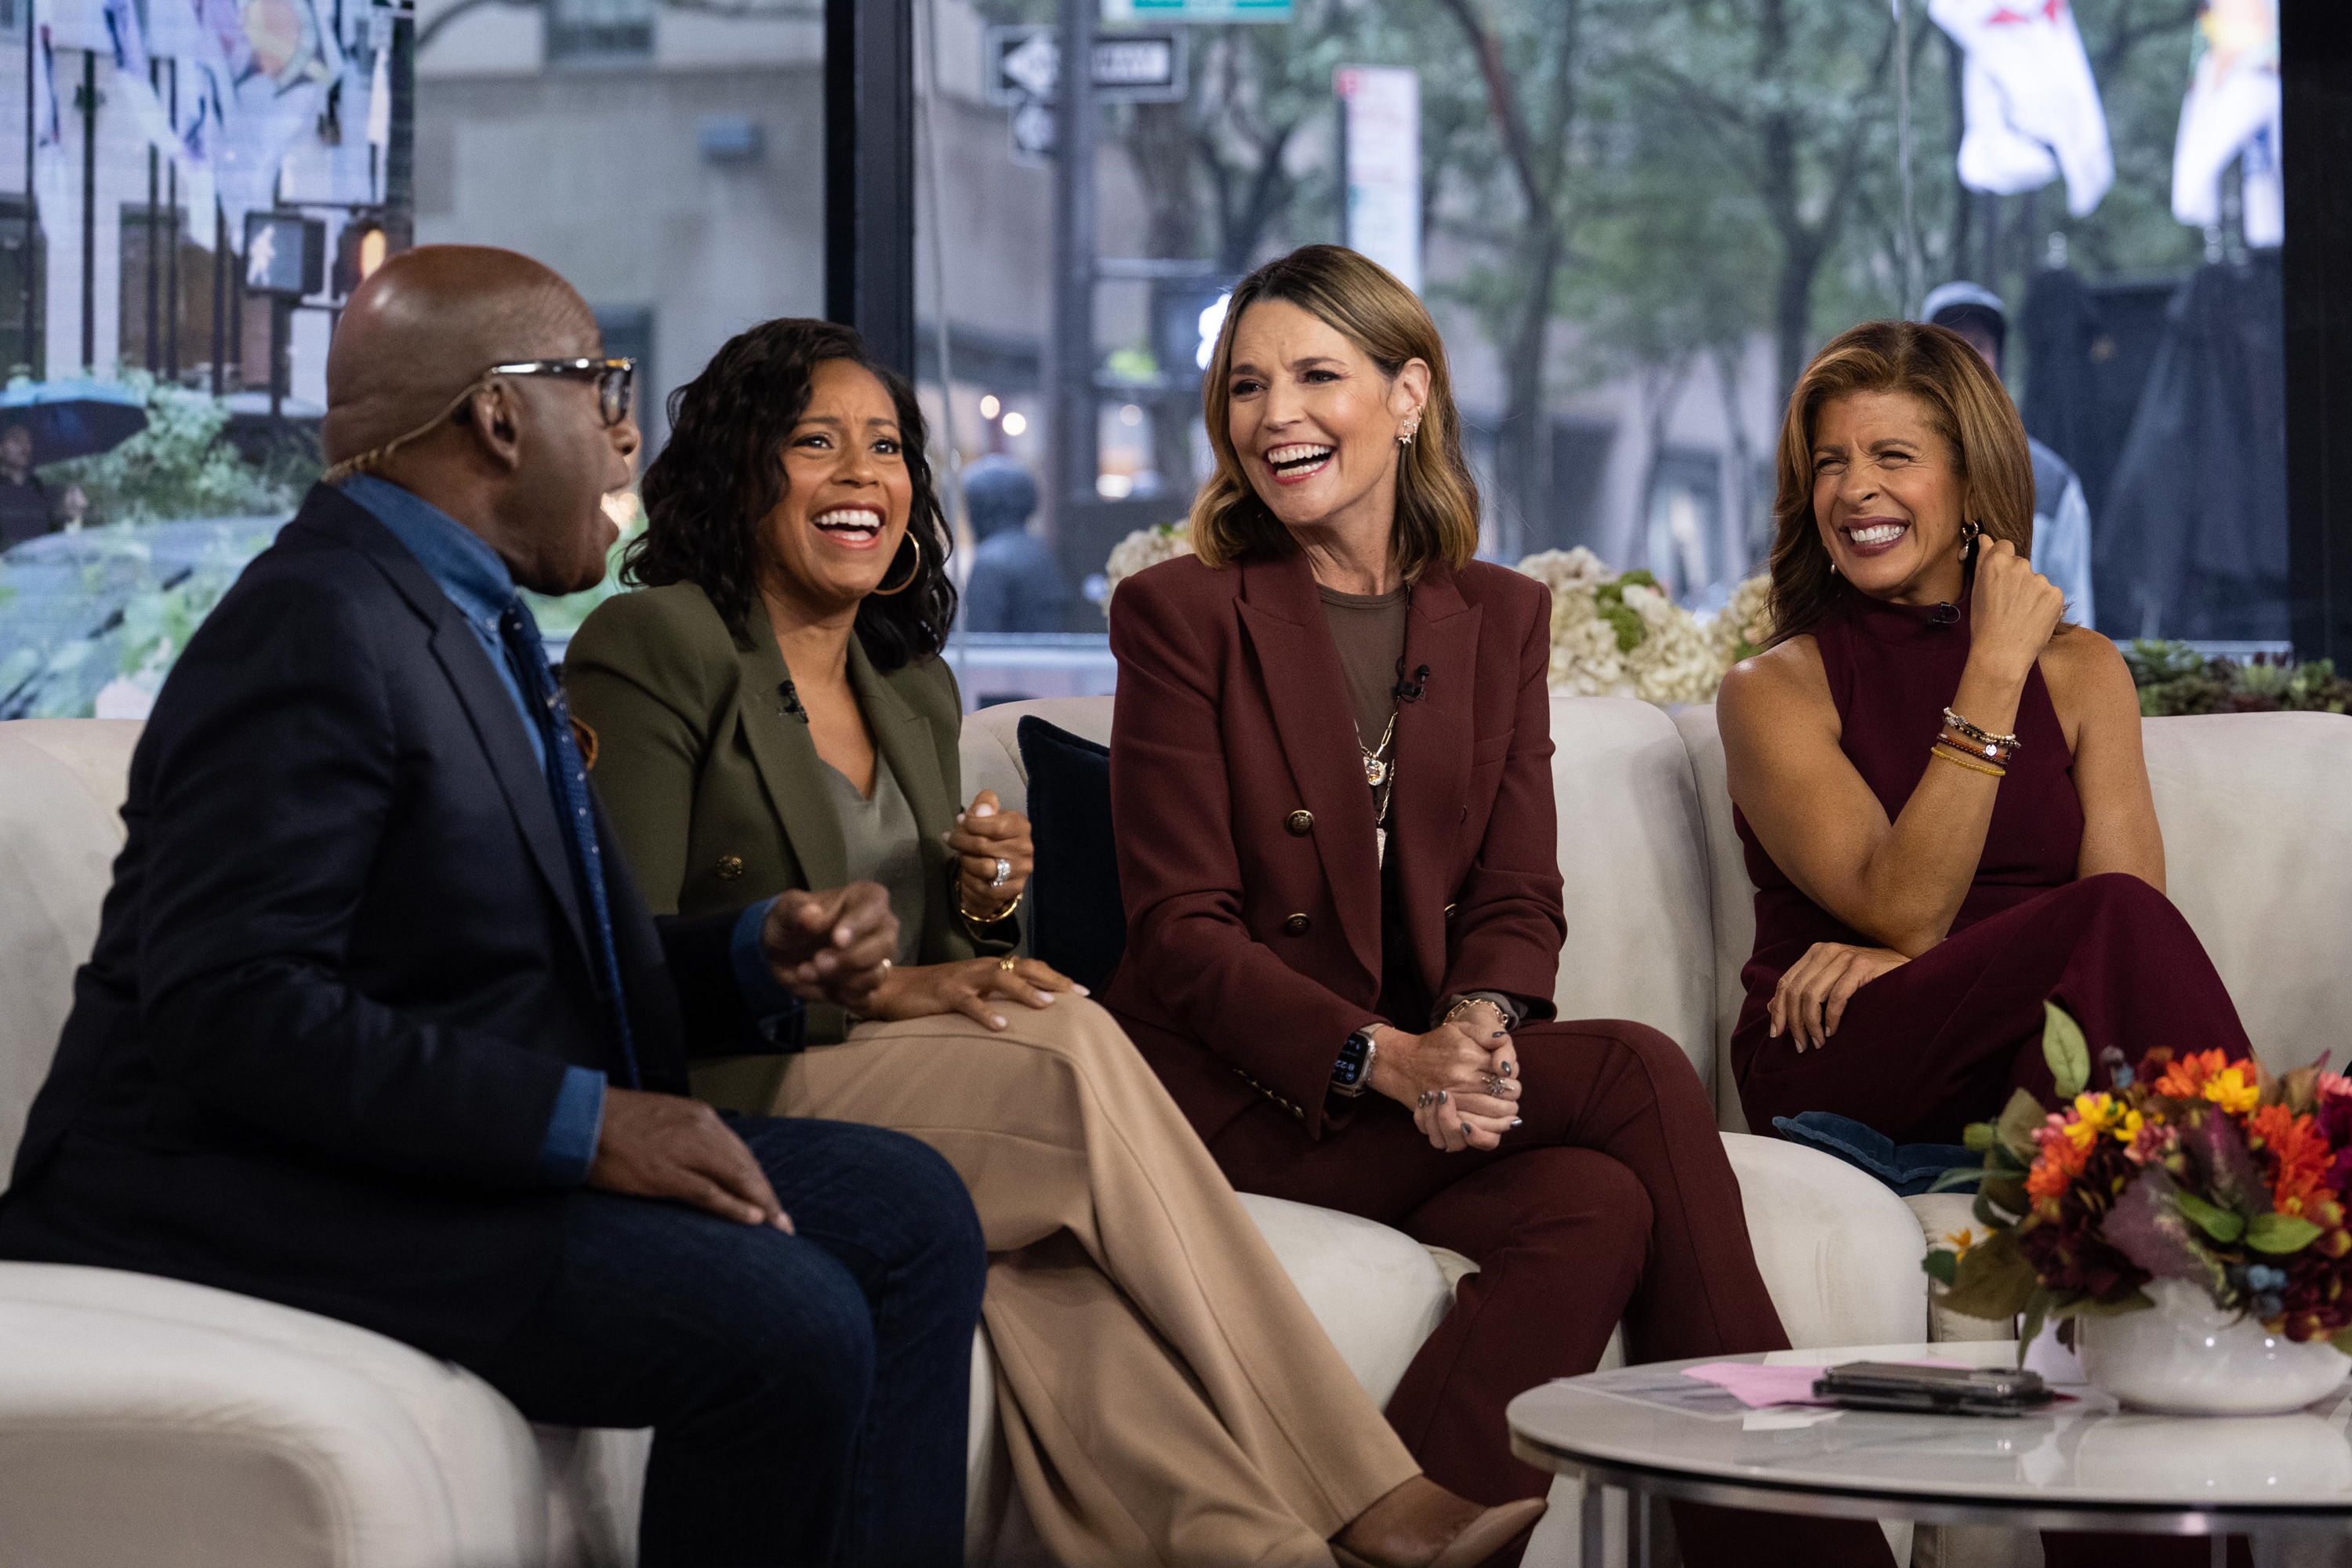 Her co-host Jenna Bush Hager recently probed Hoda about her dating life